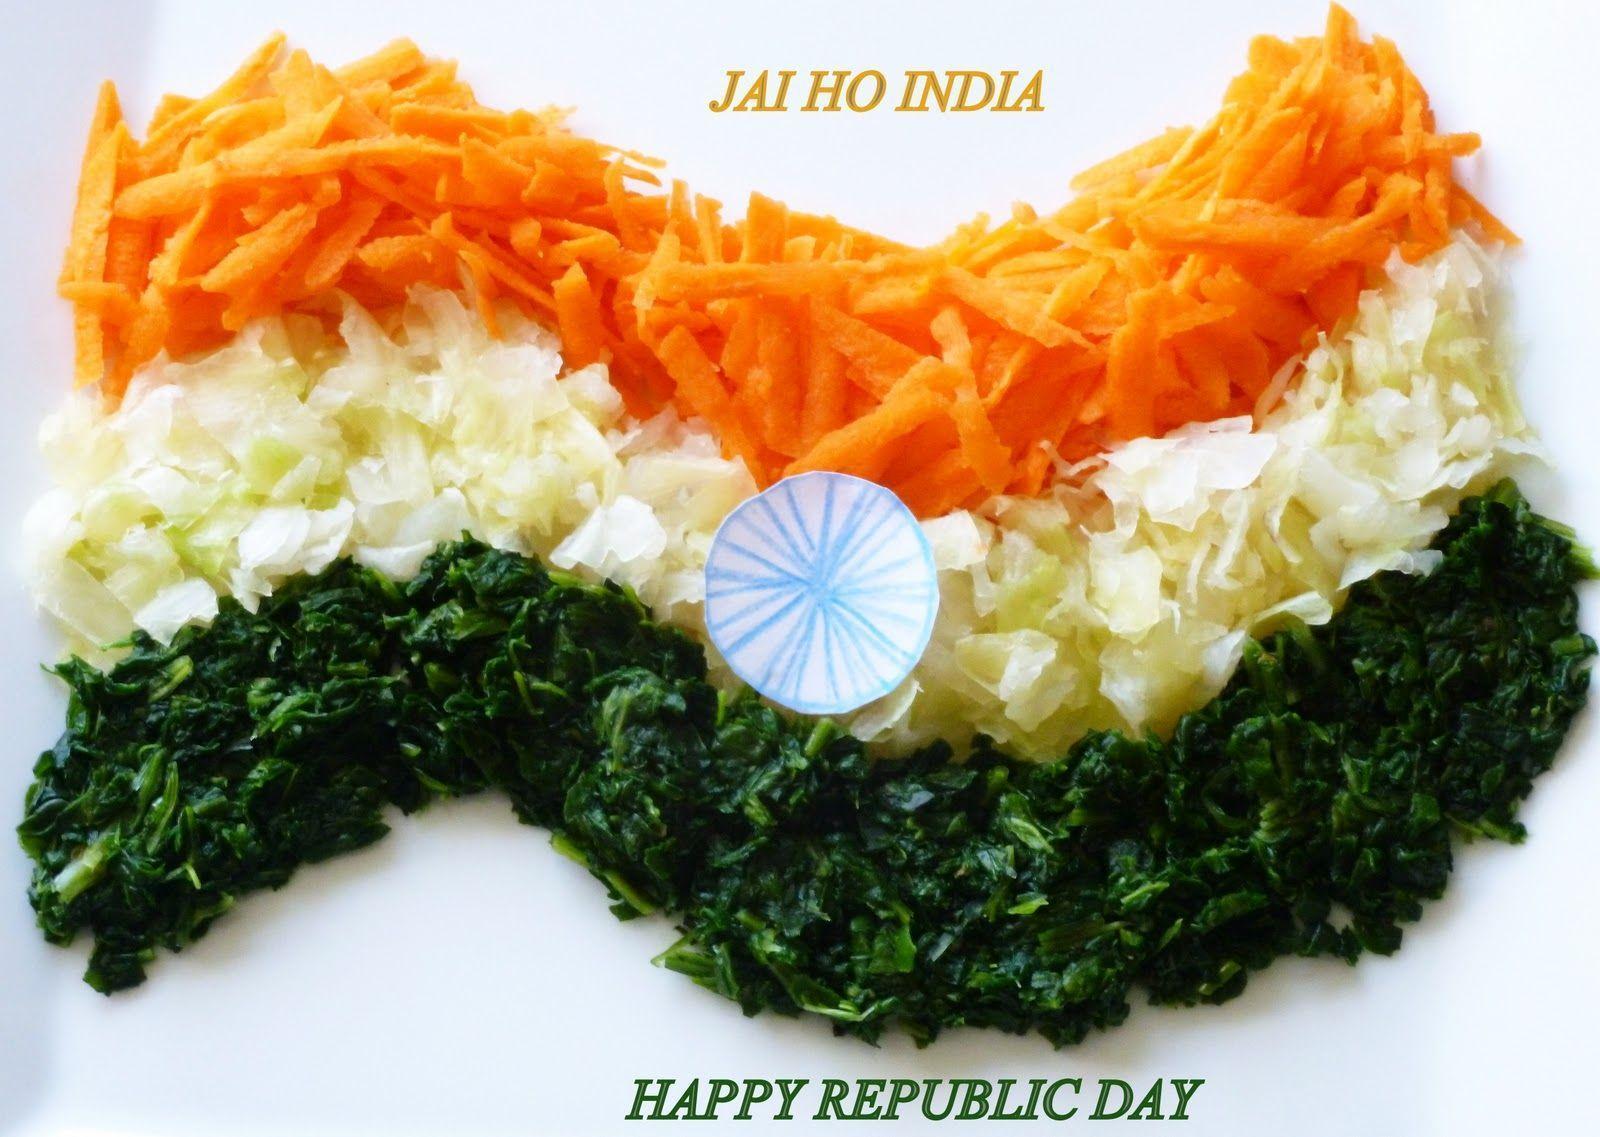 Republic day Indian Flag Image, Pictures, Wallpapers for Facebook